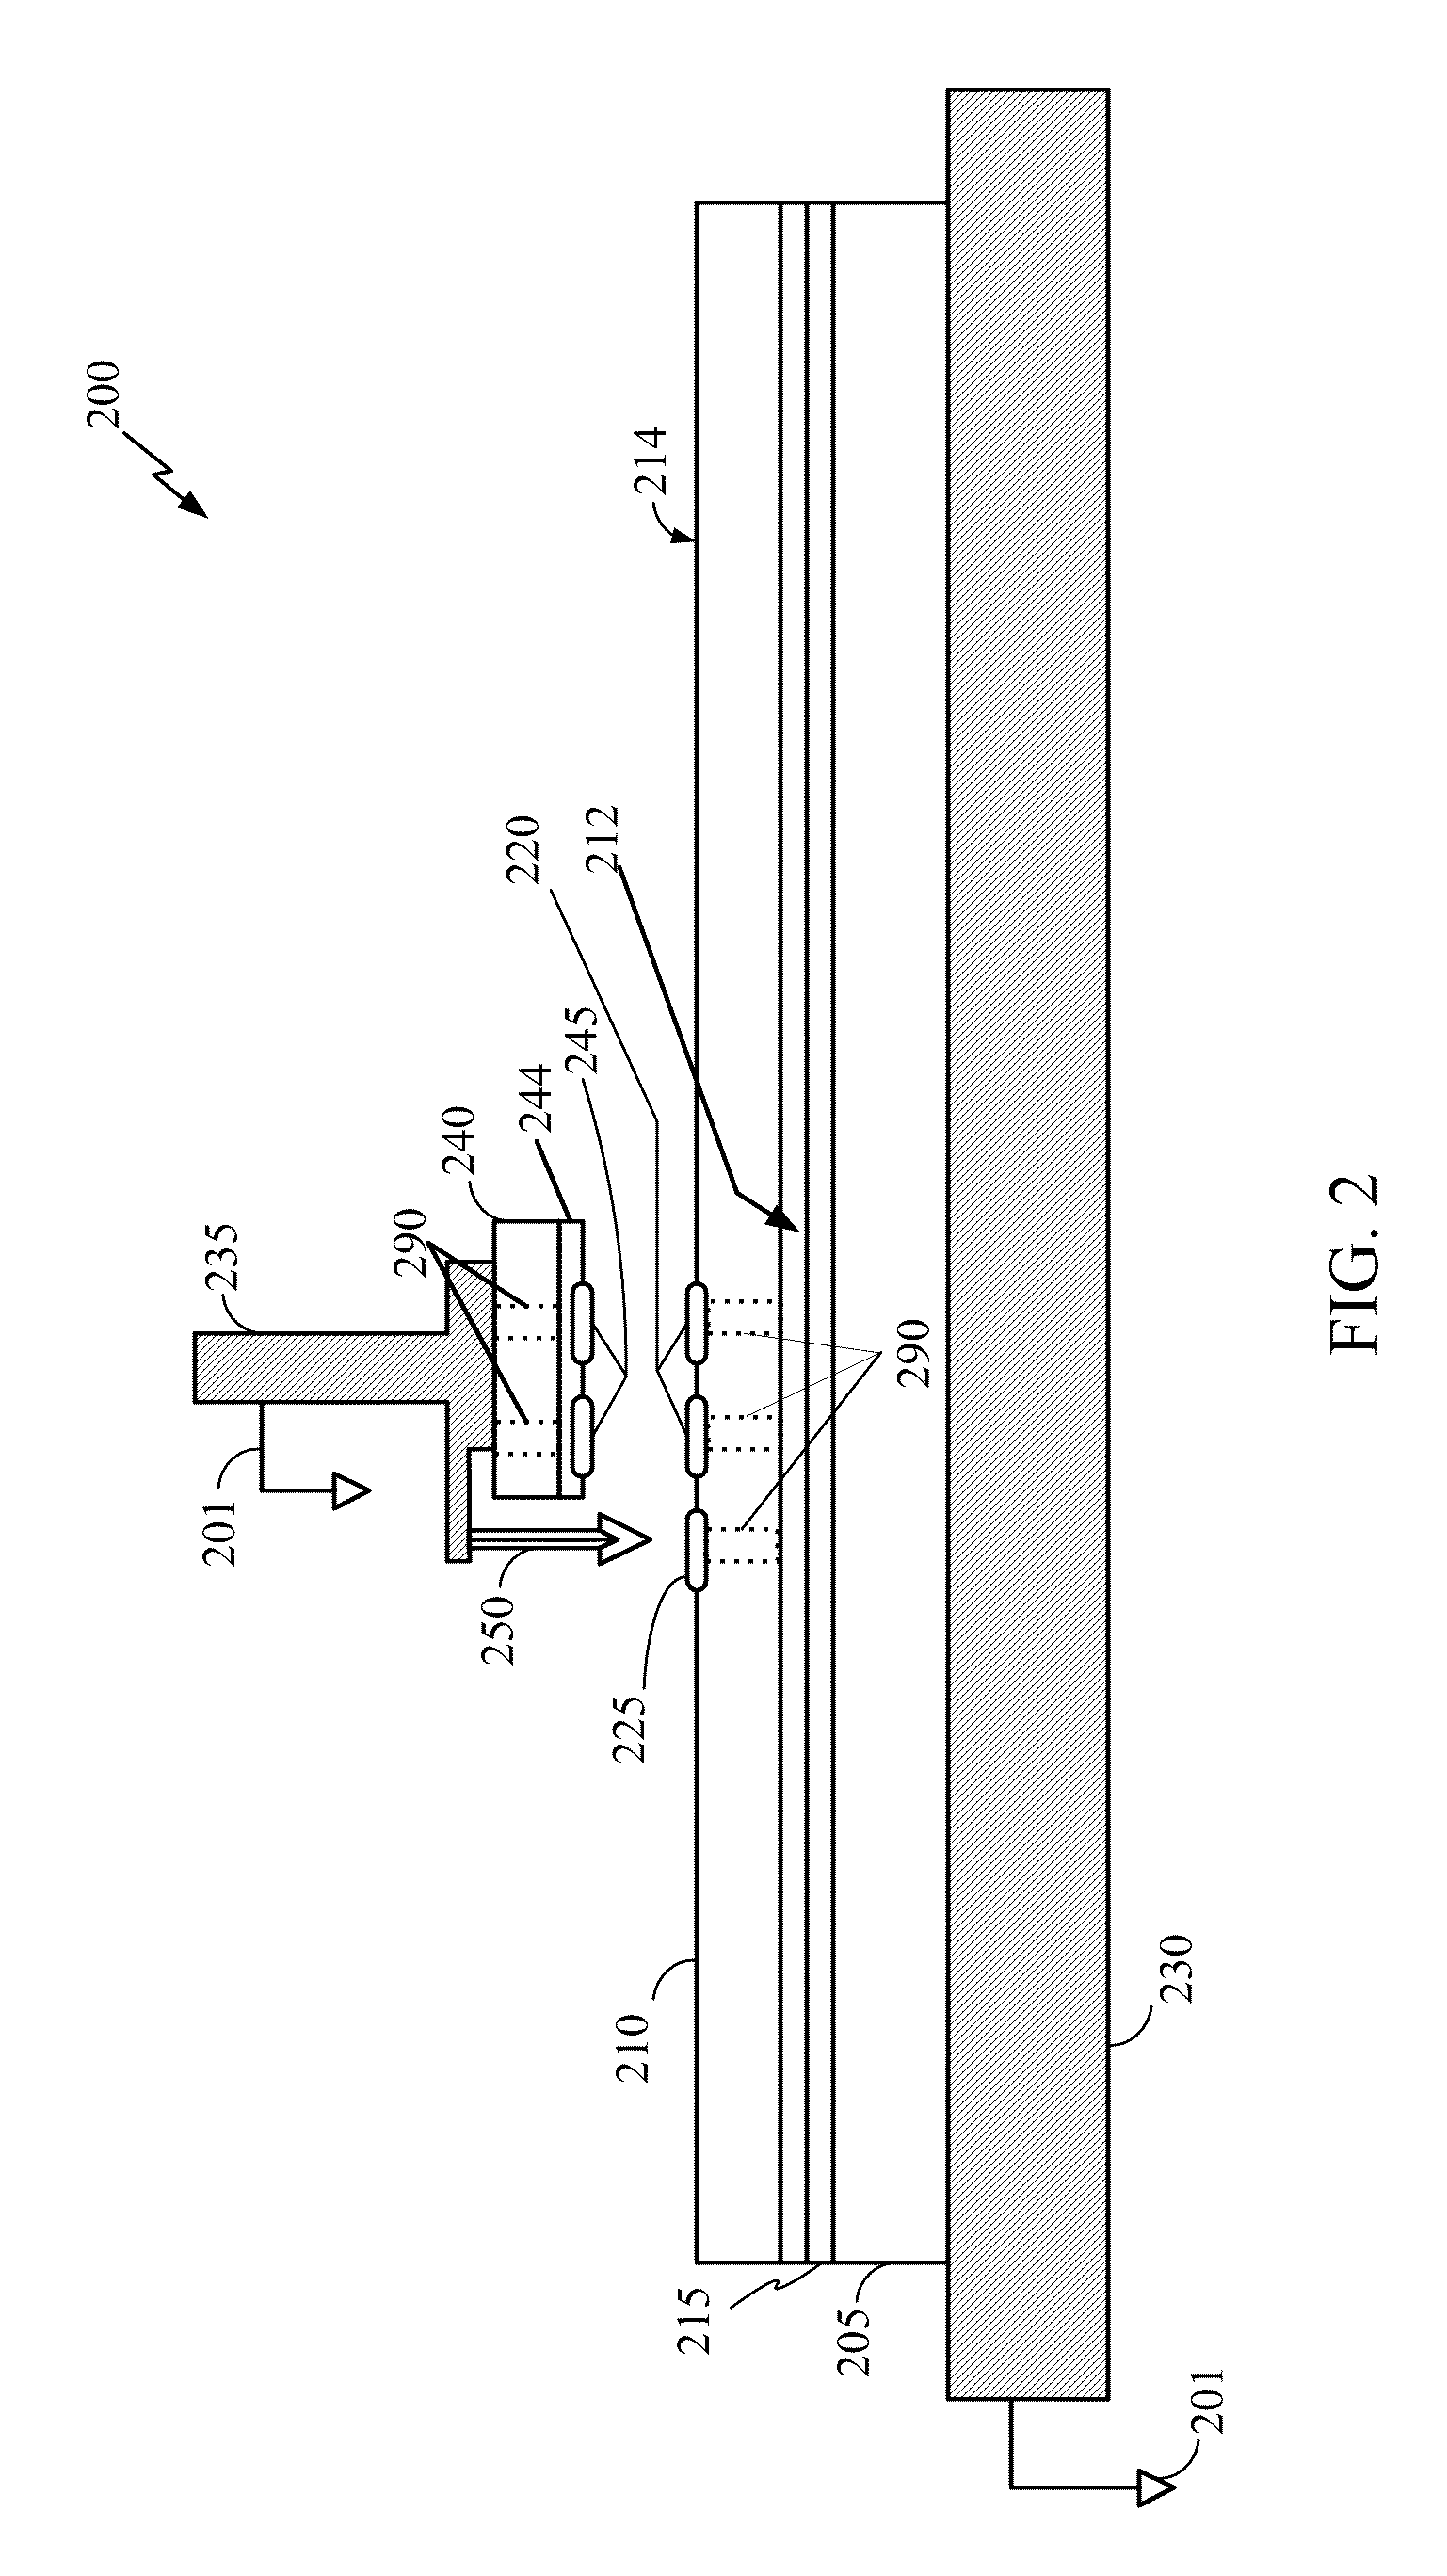 Reduced susceptibility to electrostatic discharge during 3D semiconductor device bonding and assembly